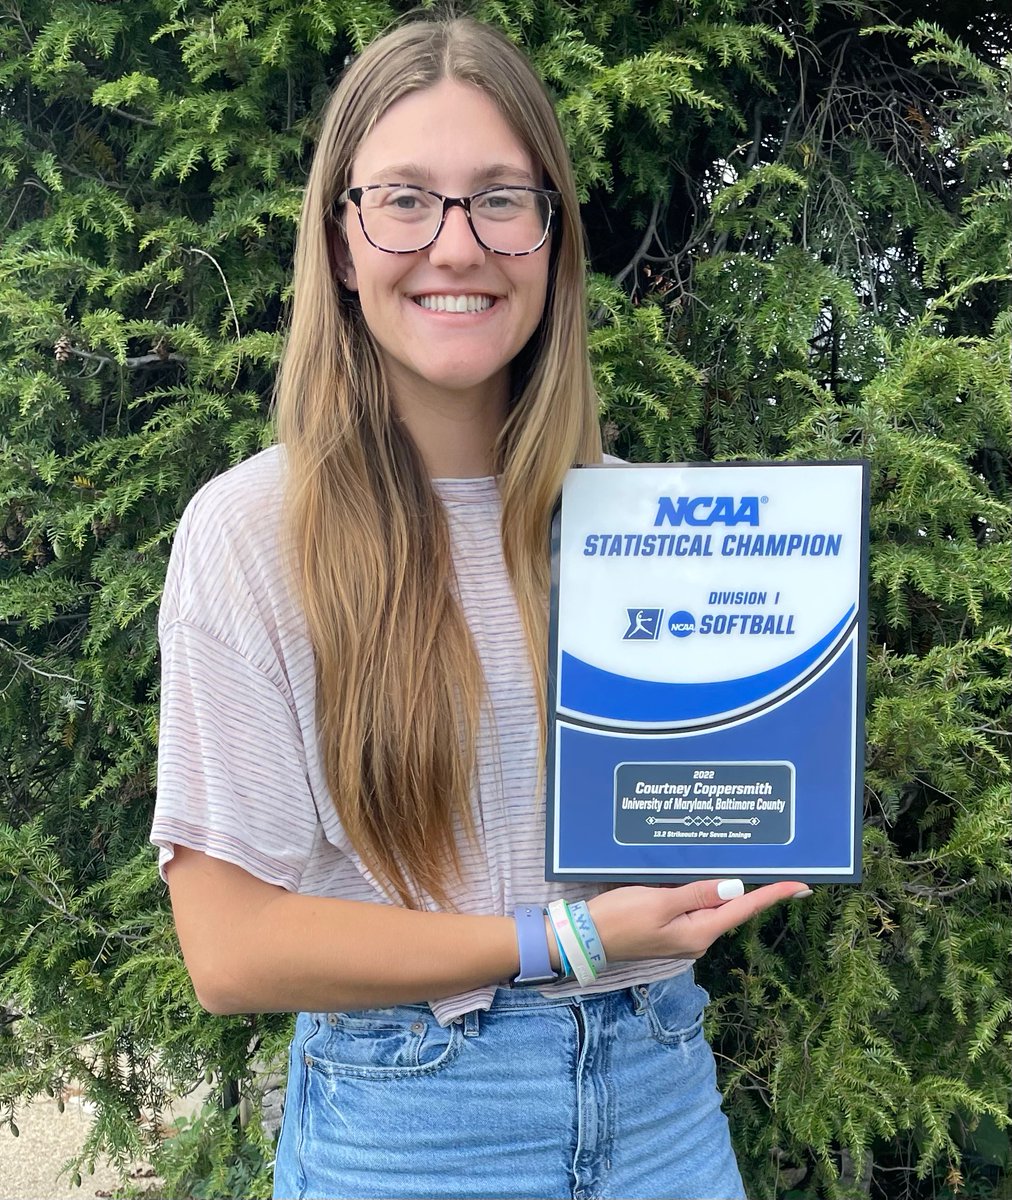 Always nice to start the semester with an award! Not only did @UMBCSoftball's Courtney Coppersmith start classes for her Chemistry PhD today, she also received her plaque from the NCAA for leading the Nation in Strikeouts per 7 Innings (13.2).